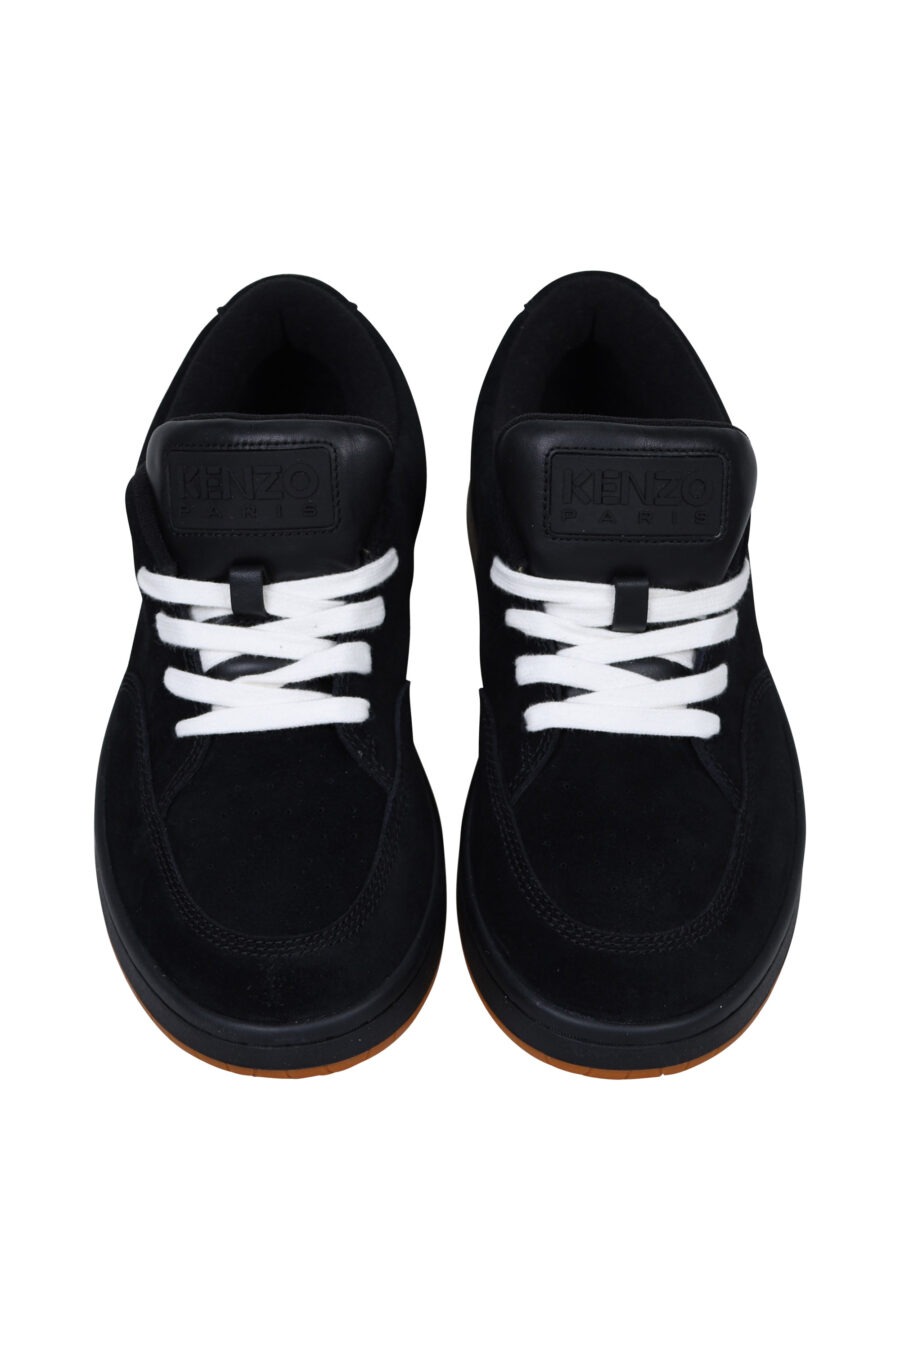 Black trainers "kenzo dome" with minilogo and brown sole - 3612230549111 4